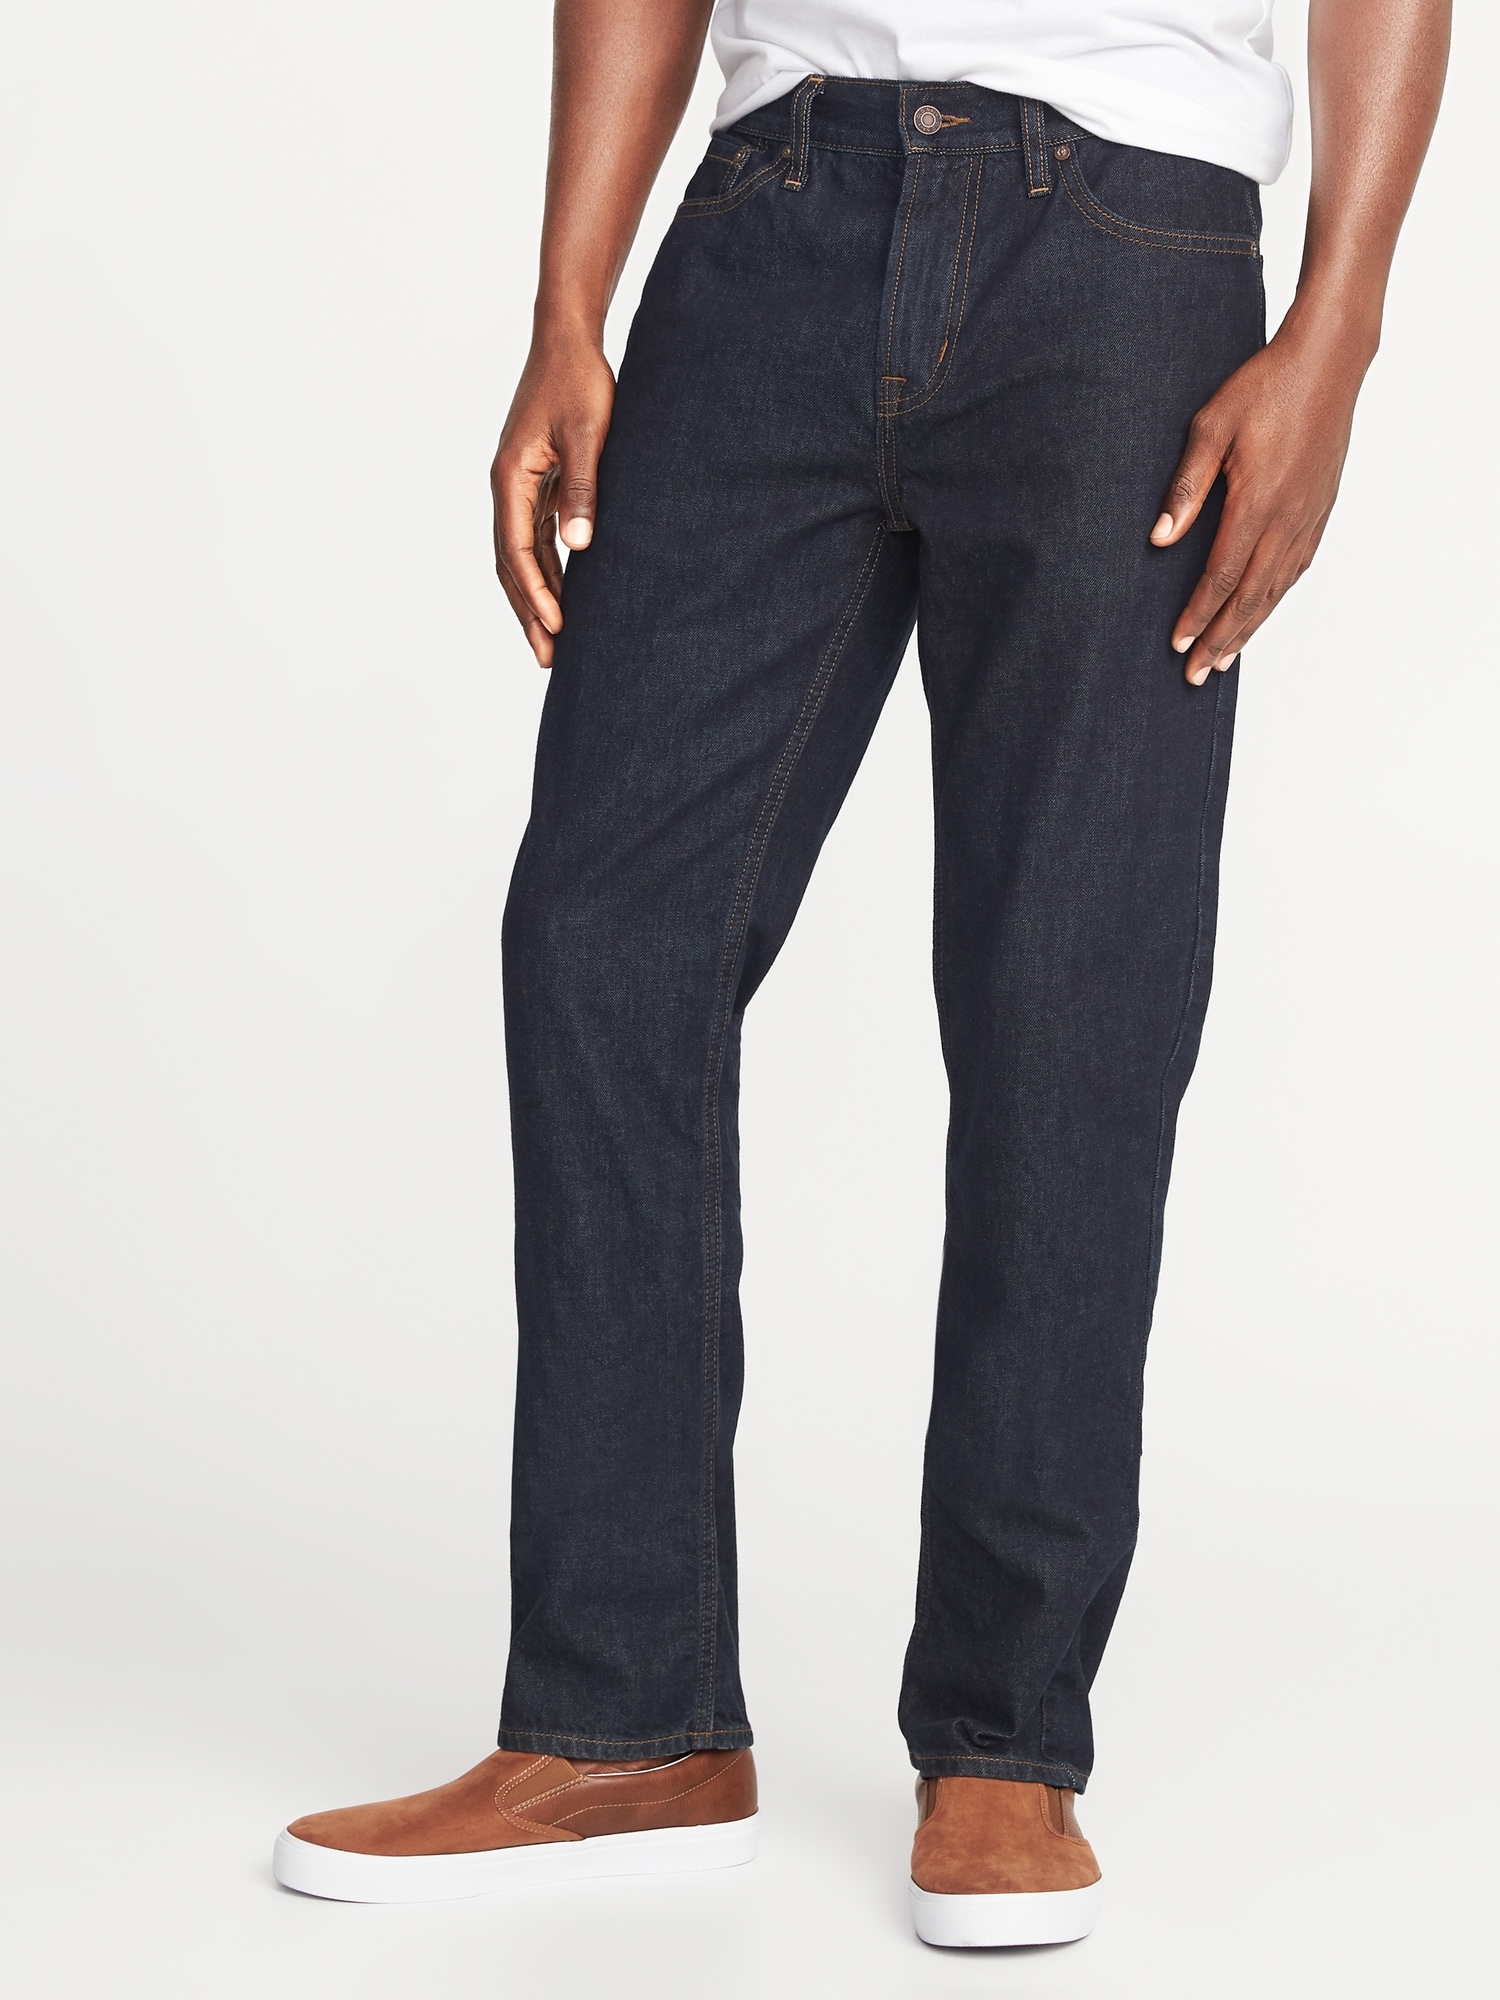 *Hot Deal* Straight Rigid Jeans For Men